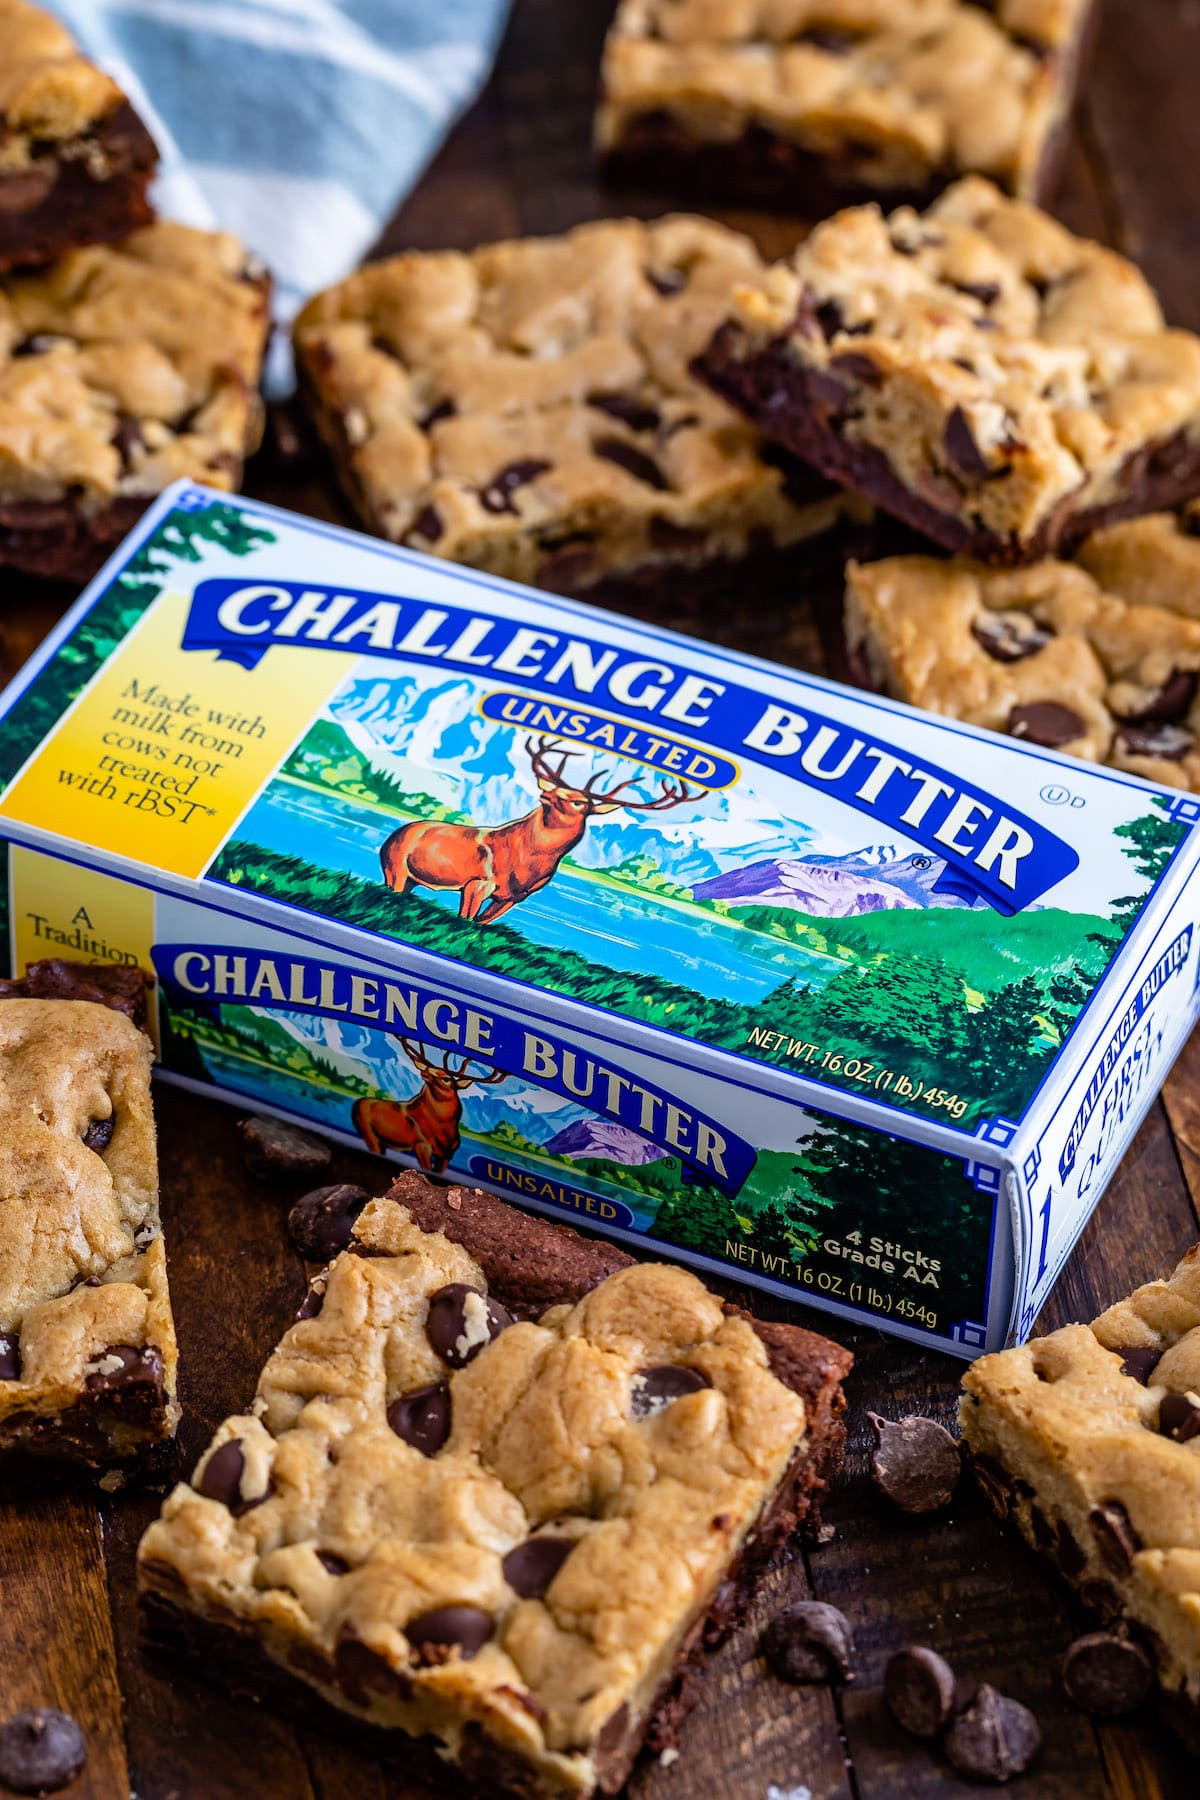 challenge butter box surrounded by brookies